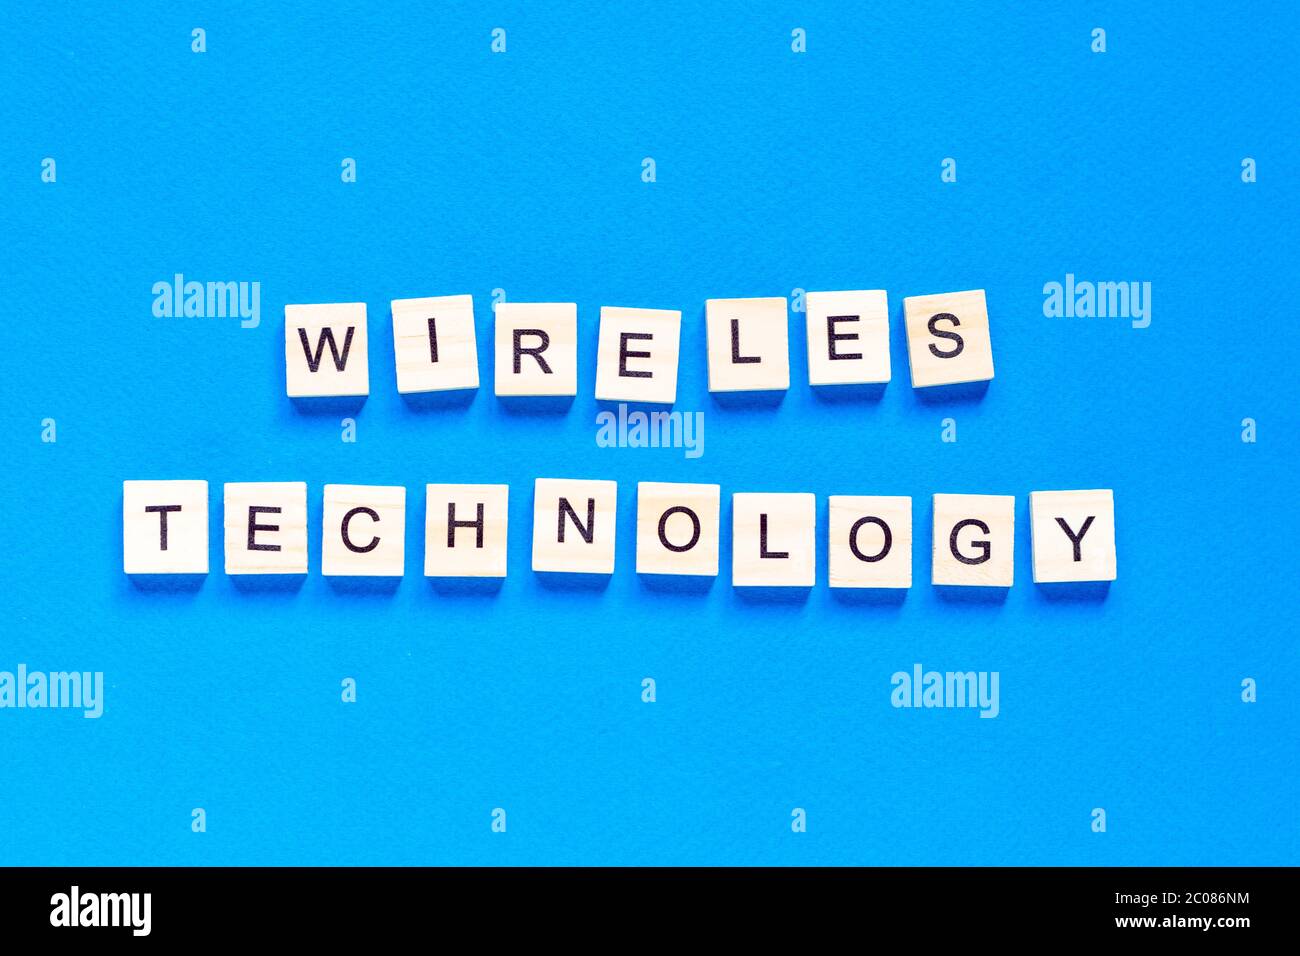 wireless technology lettering in wooden letters. The words wireless technology, spelt with wooden letter tiles over a white background. Stock Photo